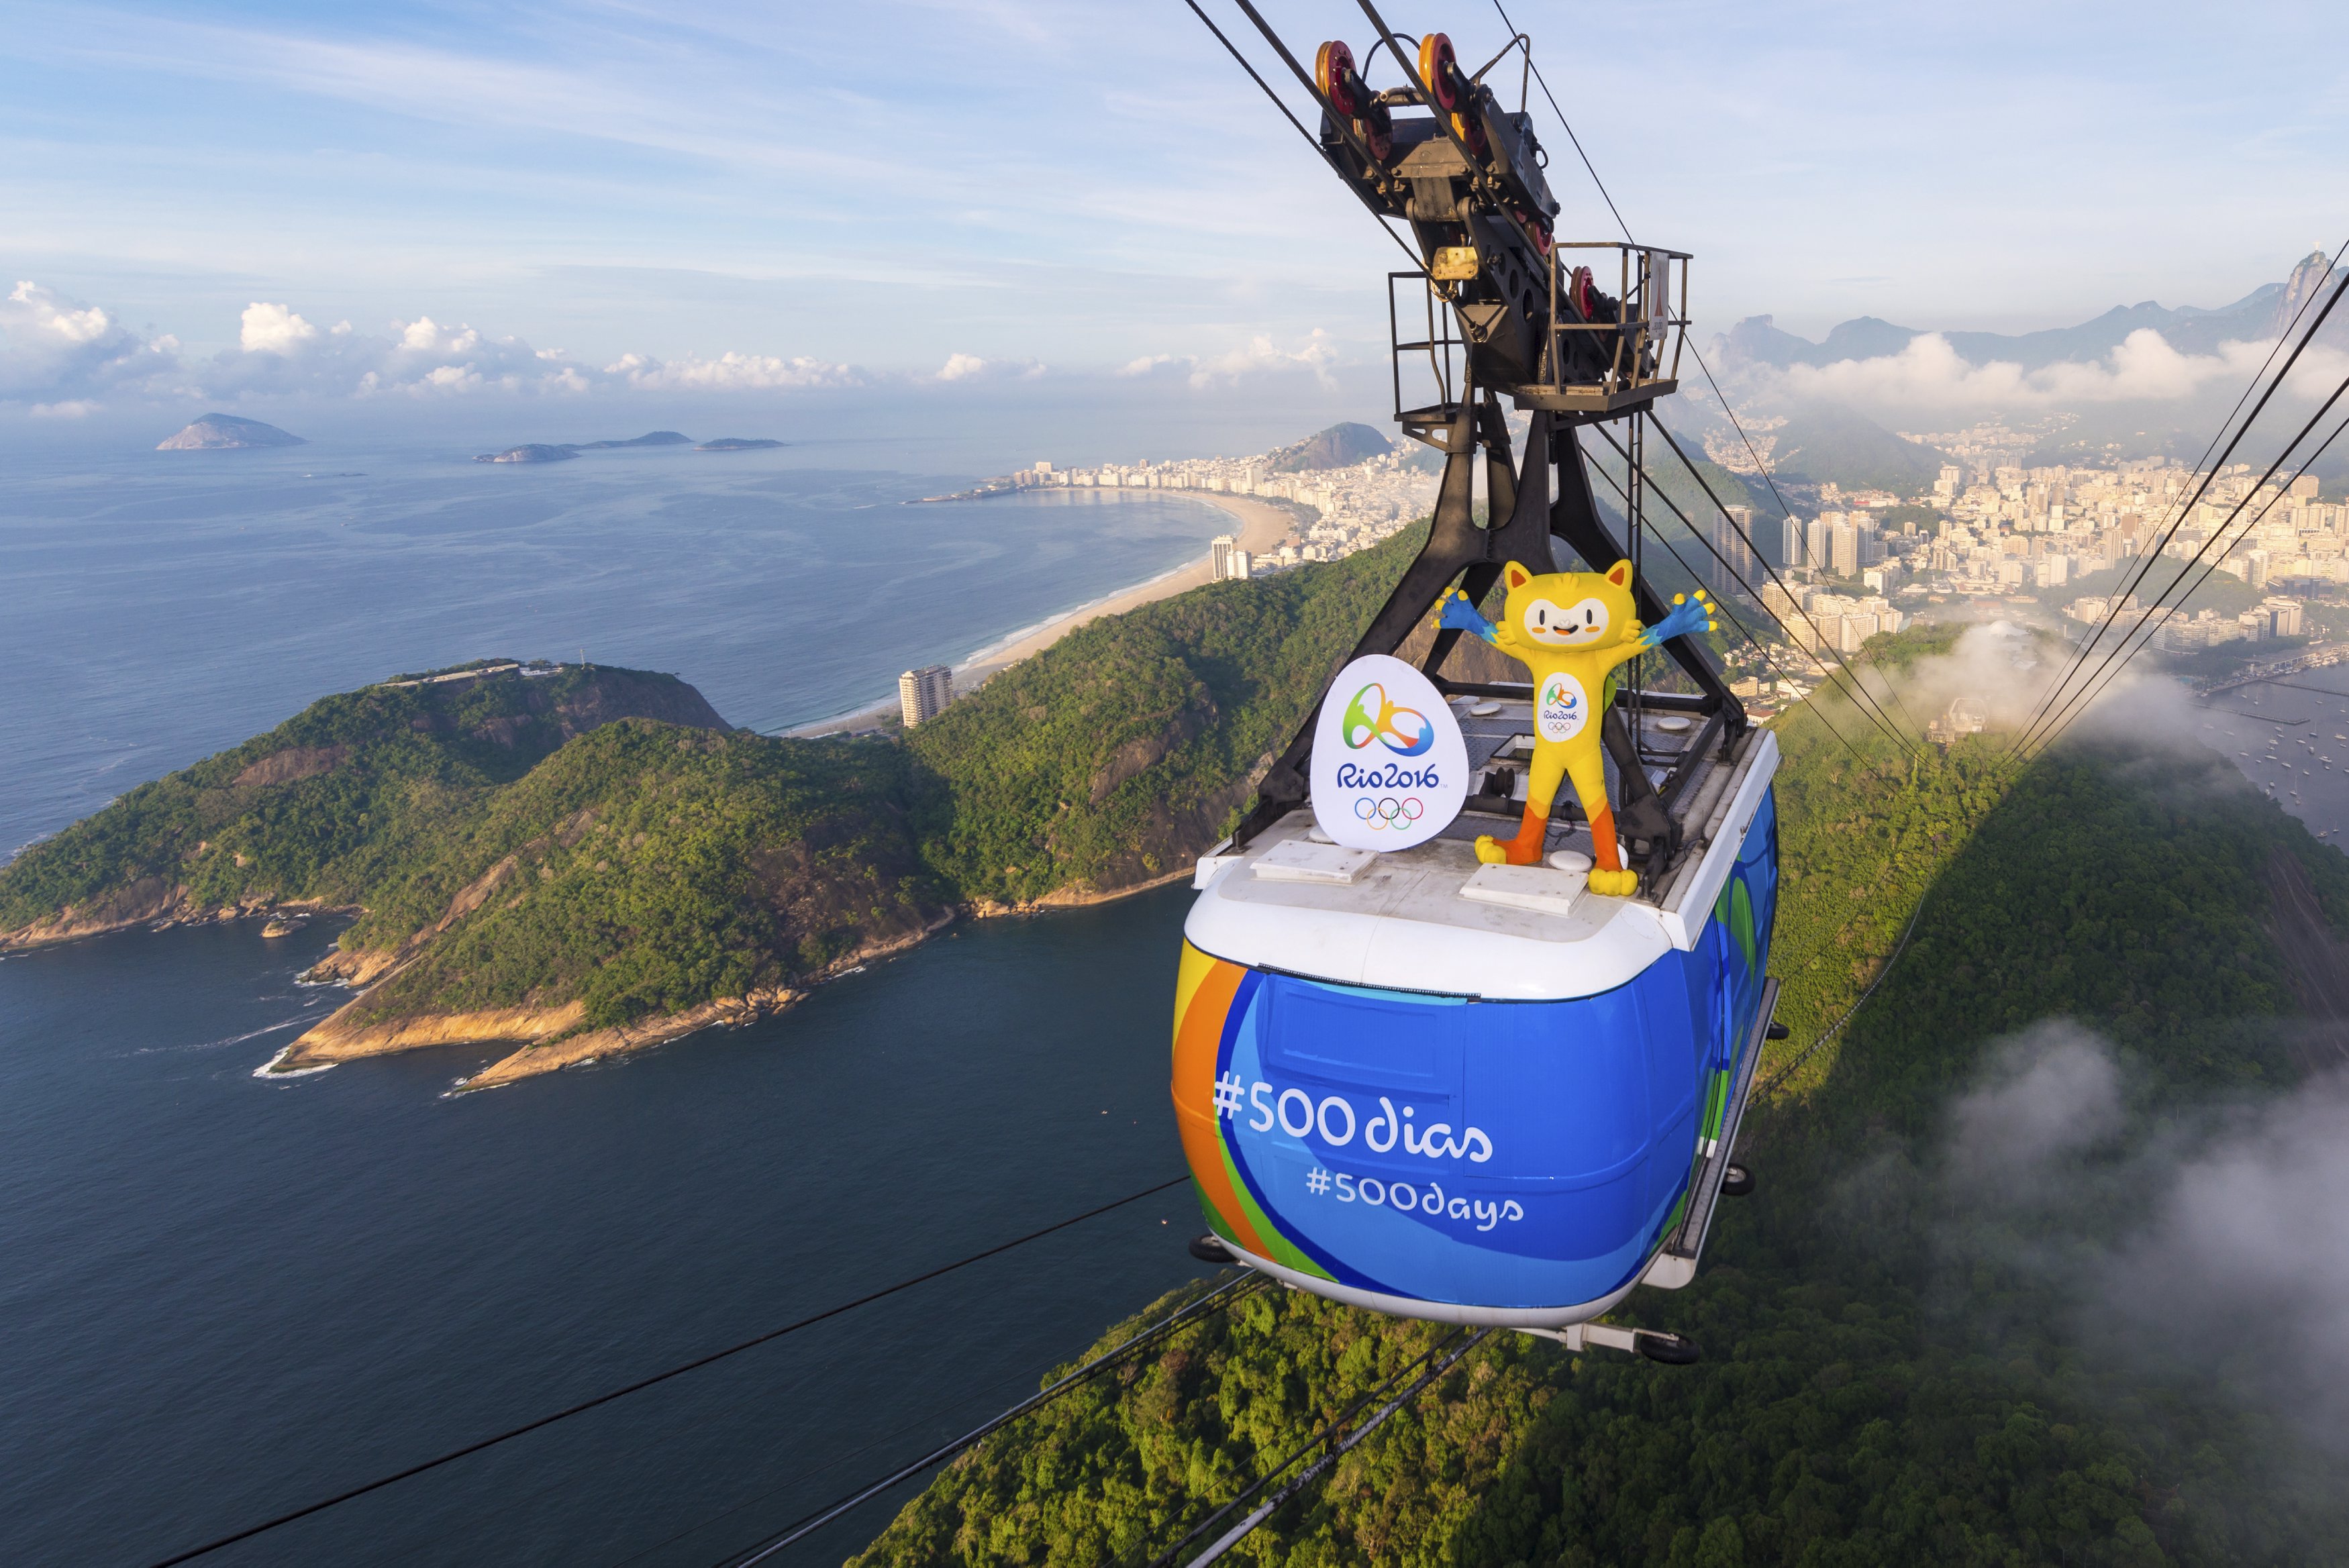 Rio 2016 Olympic mascot Vinicius is seen on the top of the Sugarloaf cable car, to mark 500 days to go until the Opening Ceremony of the 2016 Olympic Games in Rio de Janeiro